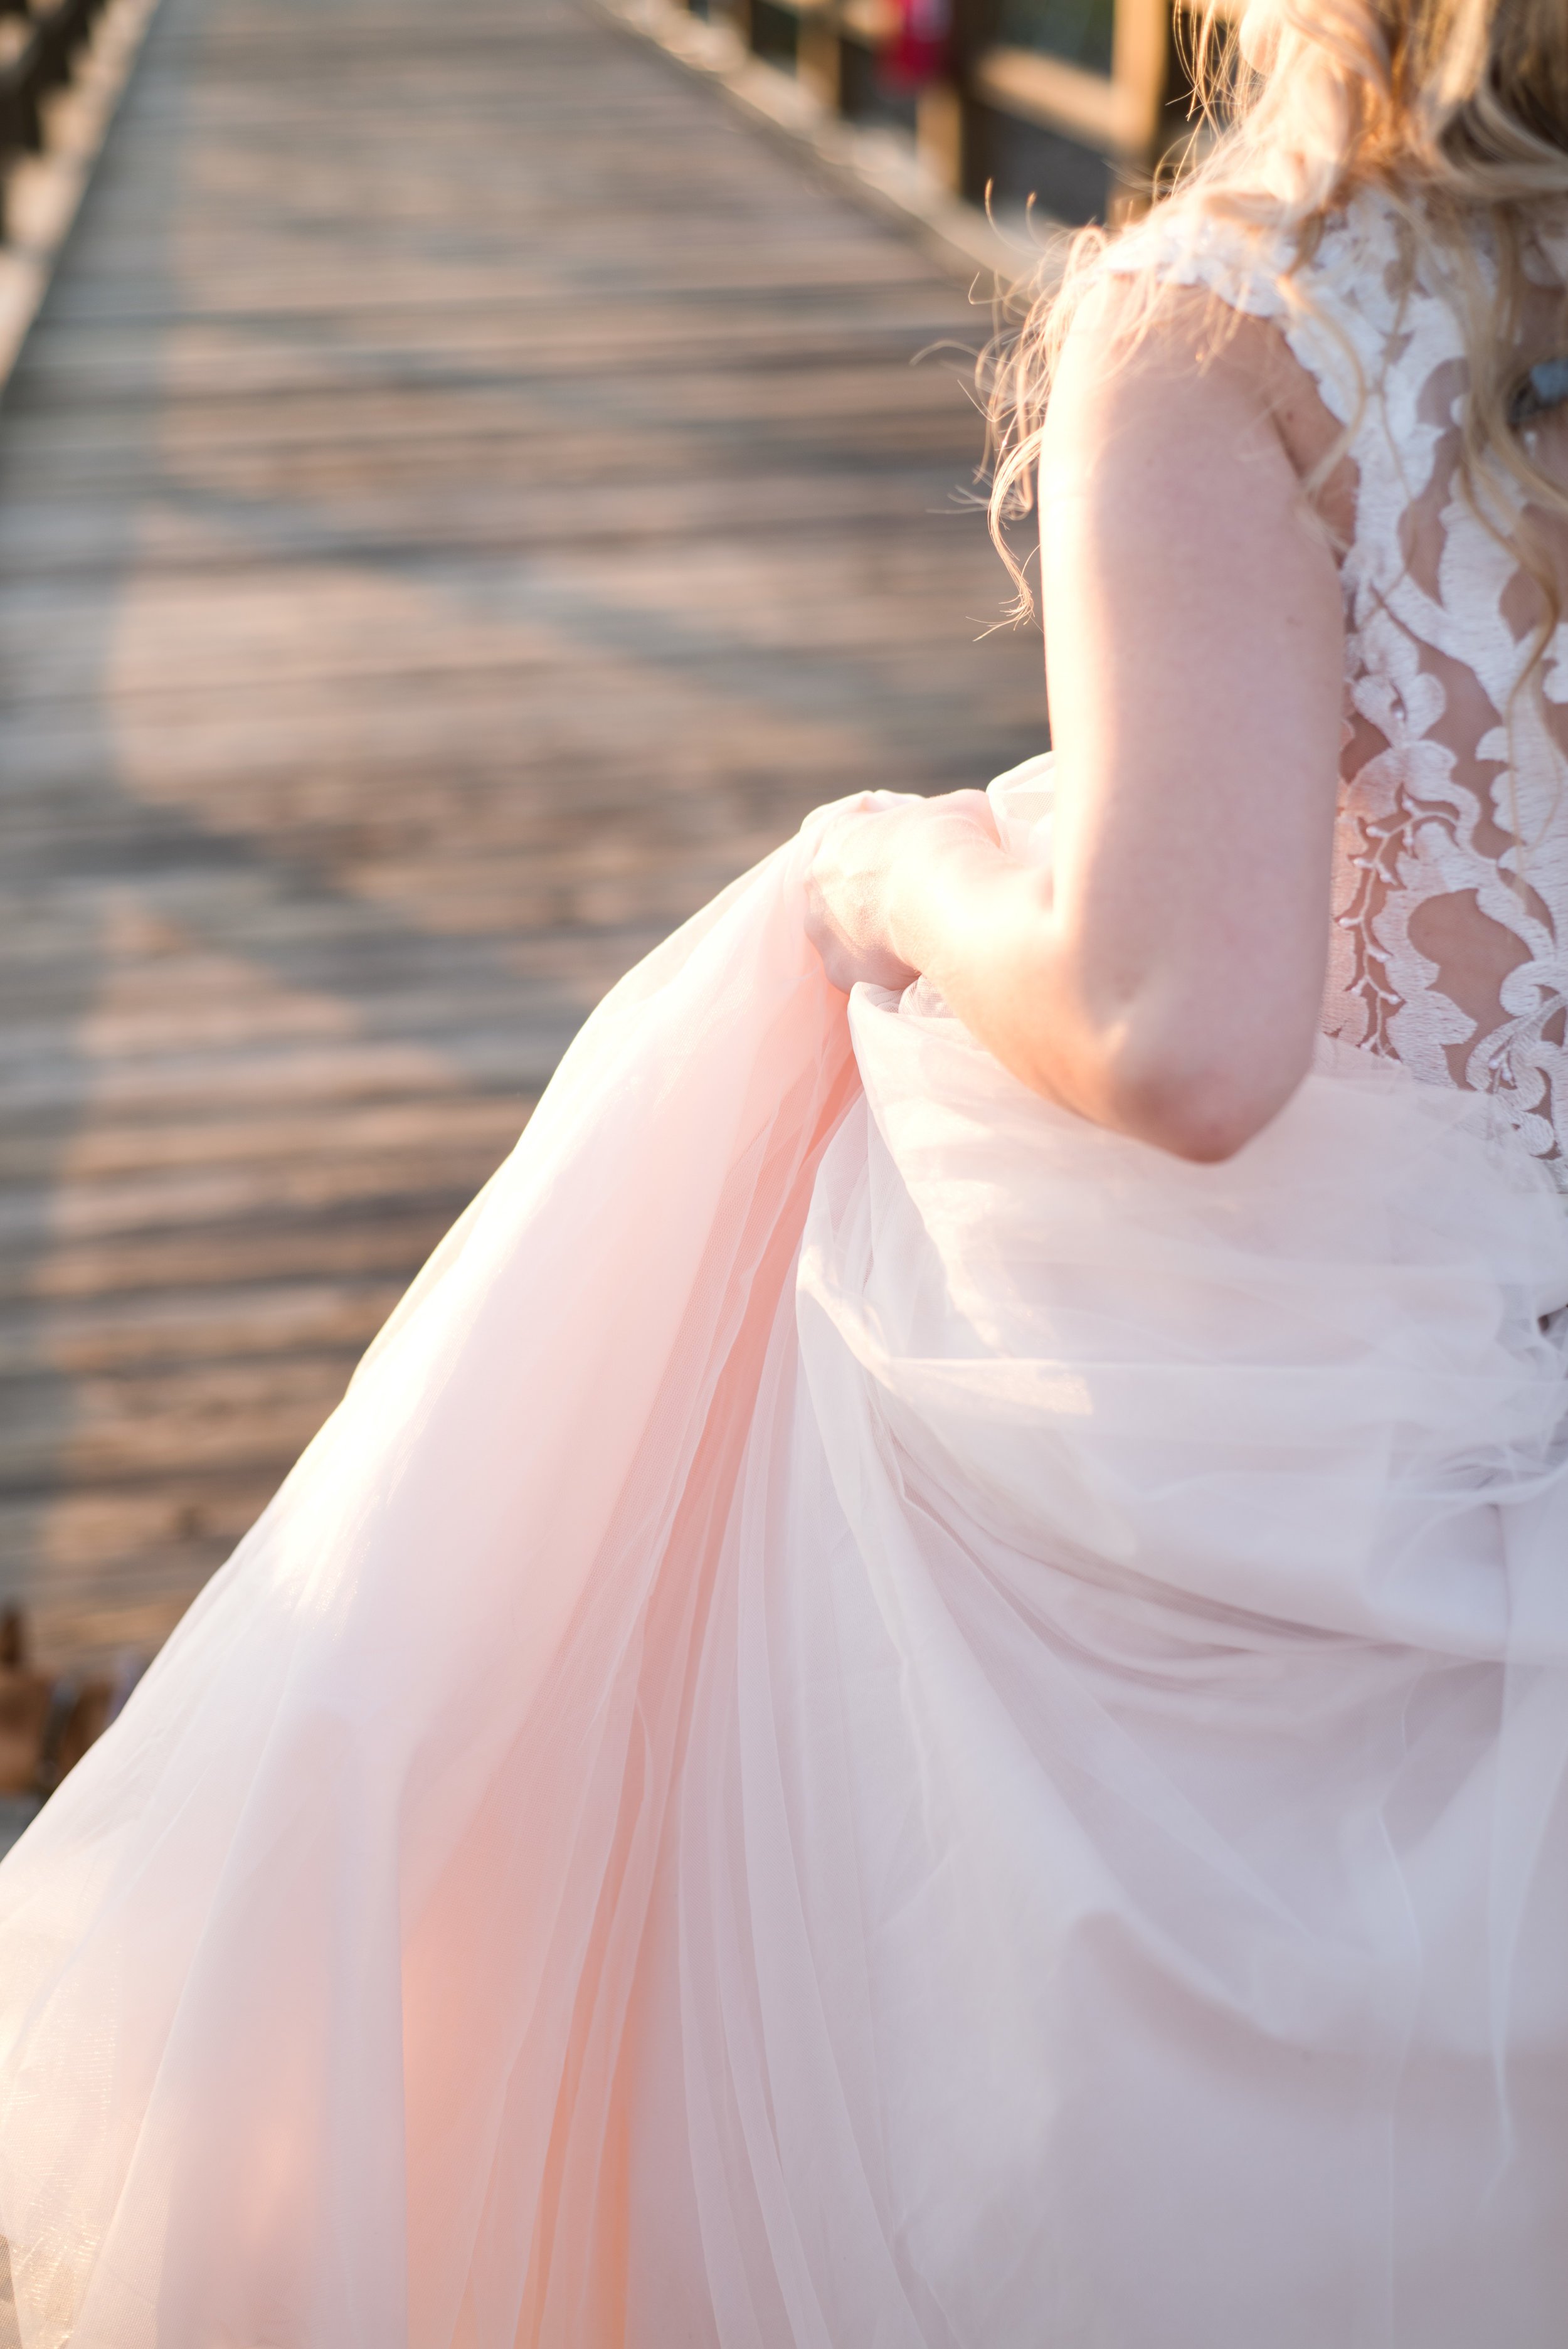 Ivory-and-Beau-bridal-boutique-Delegal-Marina-Samba-to-the-Sea-Photography-carrie-maggie-sottero-rebecca-ingram-bridal-savannah-bridal-boutique-savannah-weddings-marsh-wedding-georgia-wedding-savannah-wedding-sunset-wedding-savannah-wedding-gowns-4.jpg